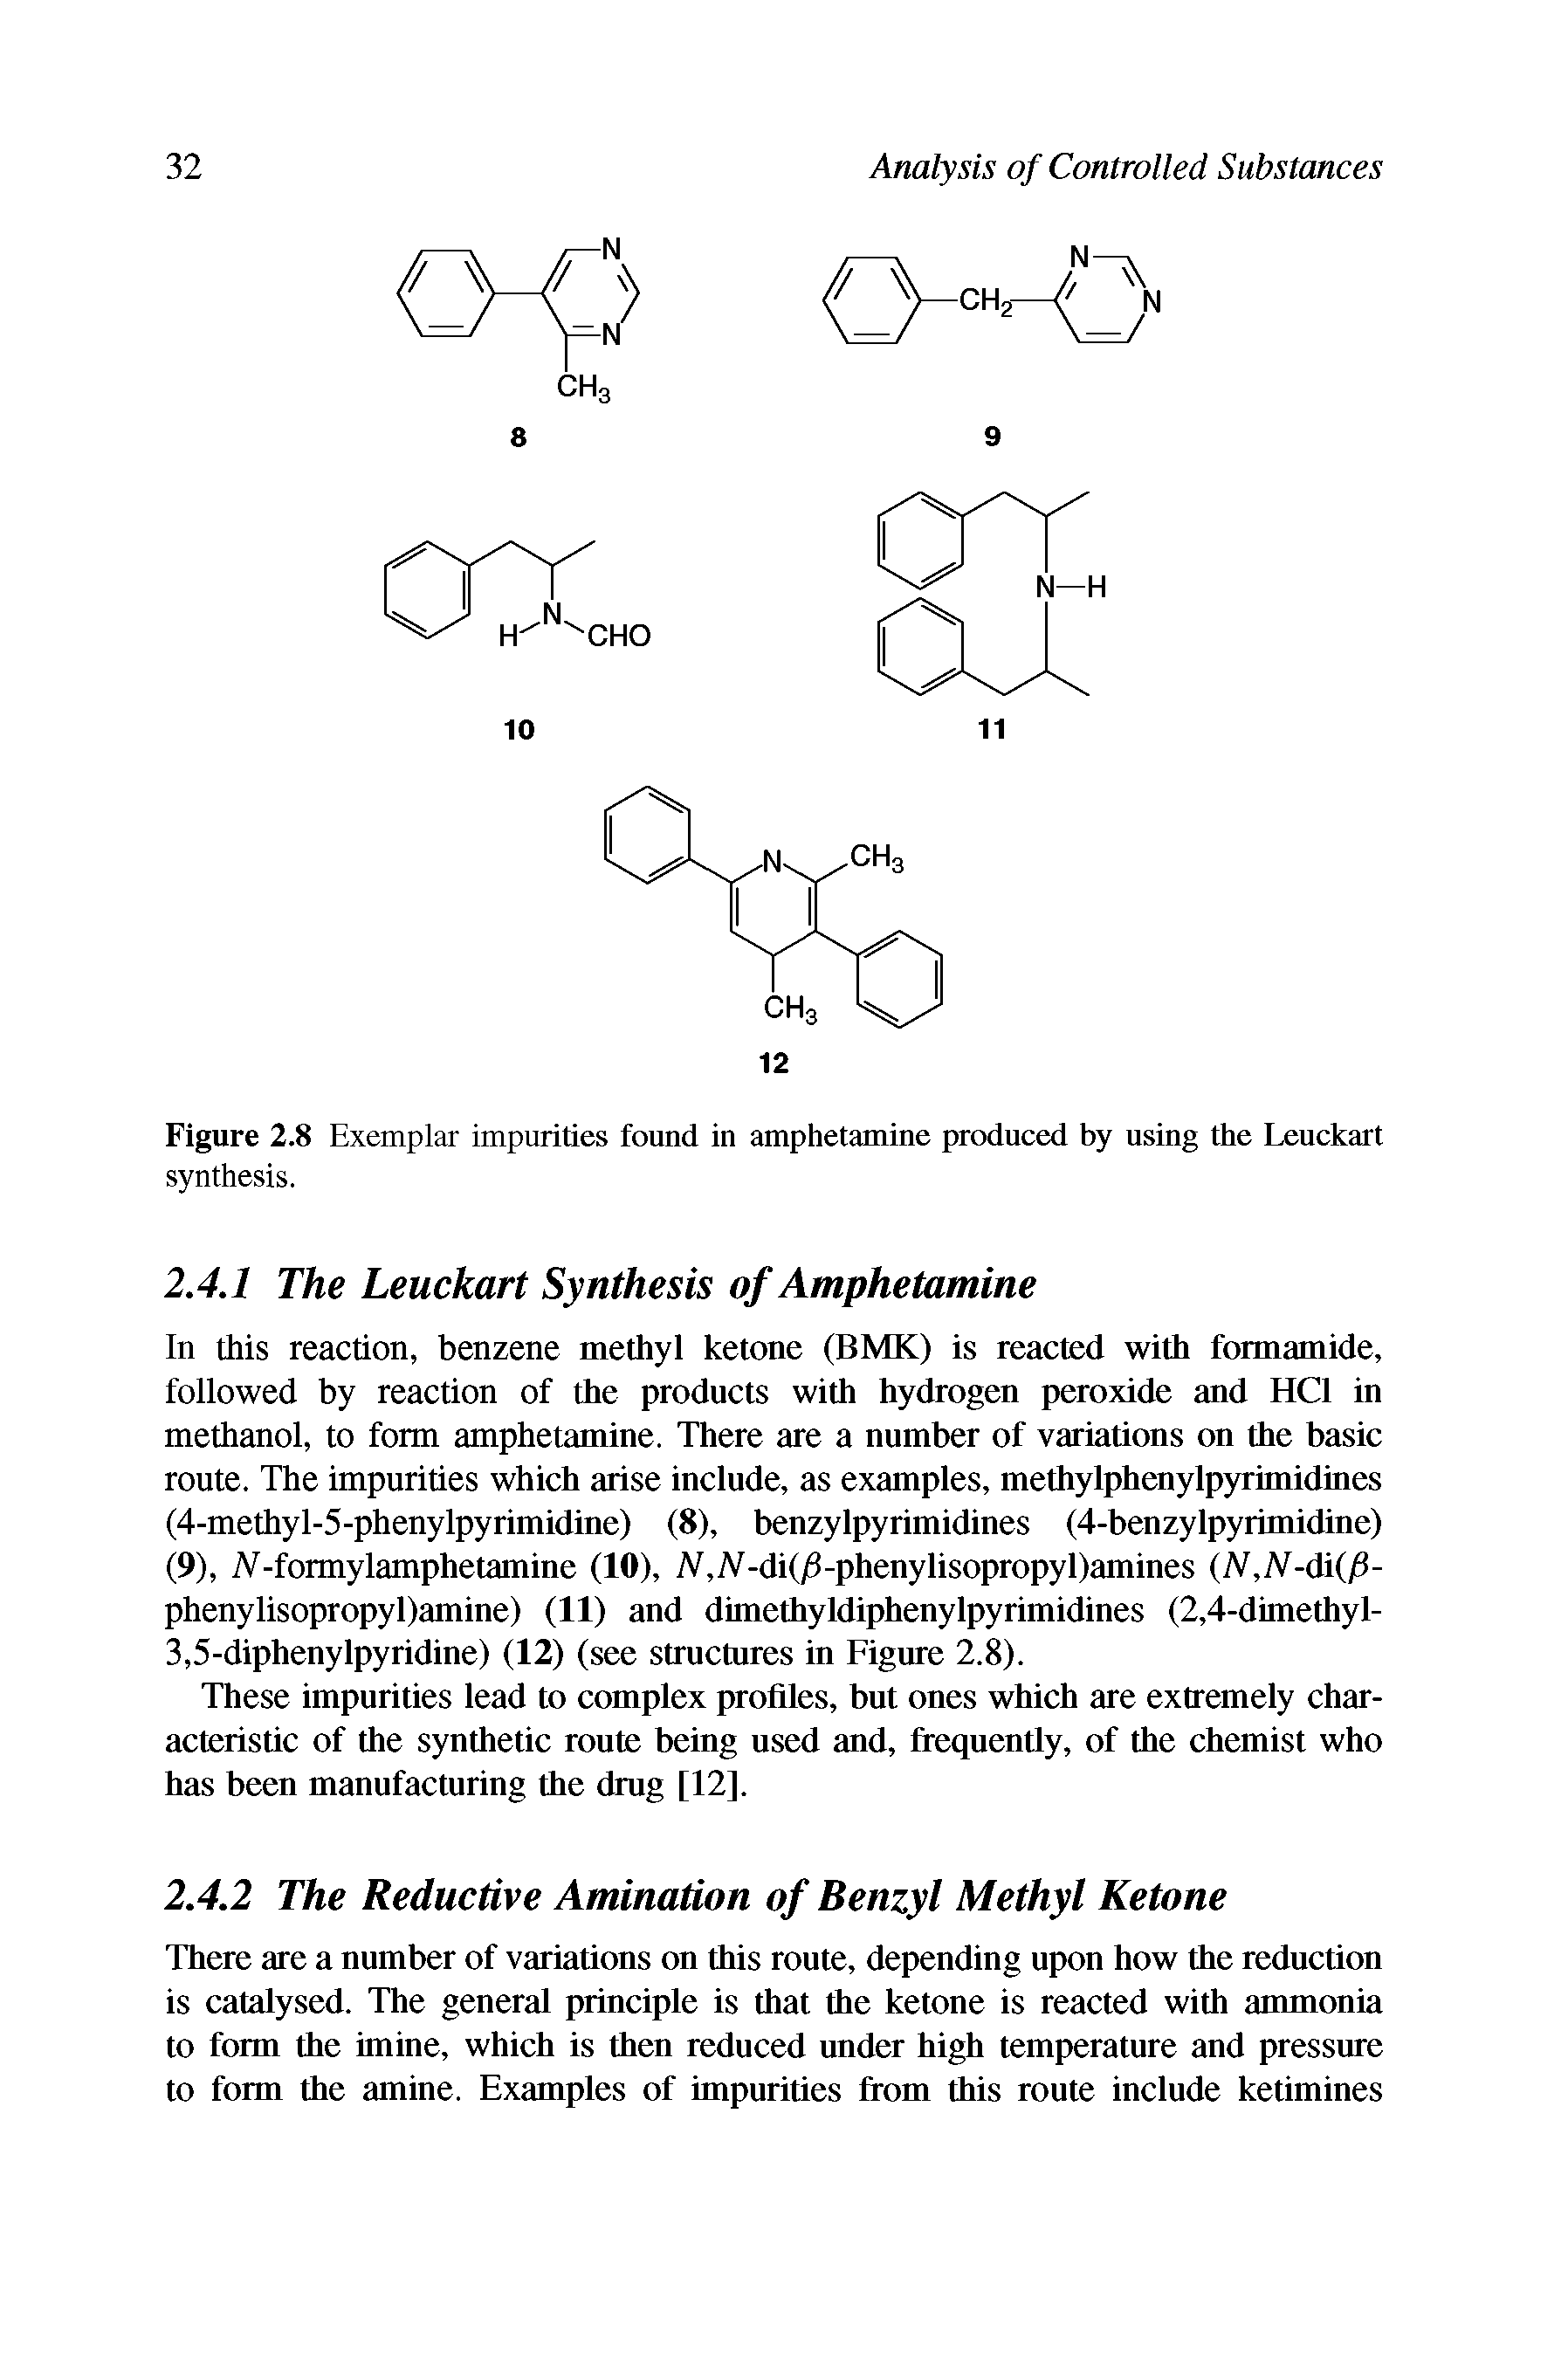 Figure 2.8 Exemplar impurities found in amphetamine produced by using the Leuckart synthesis.